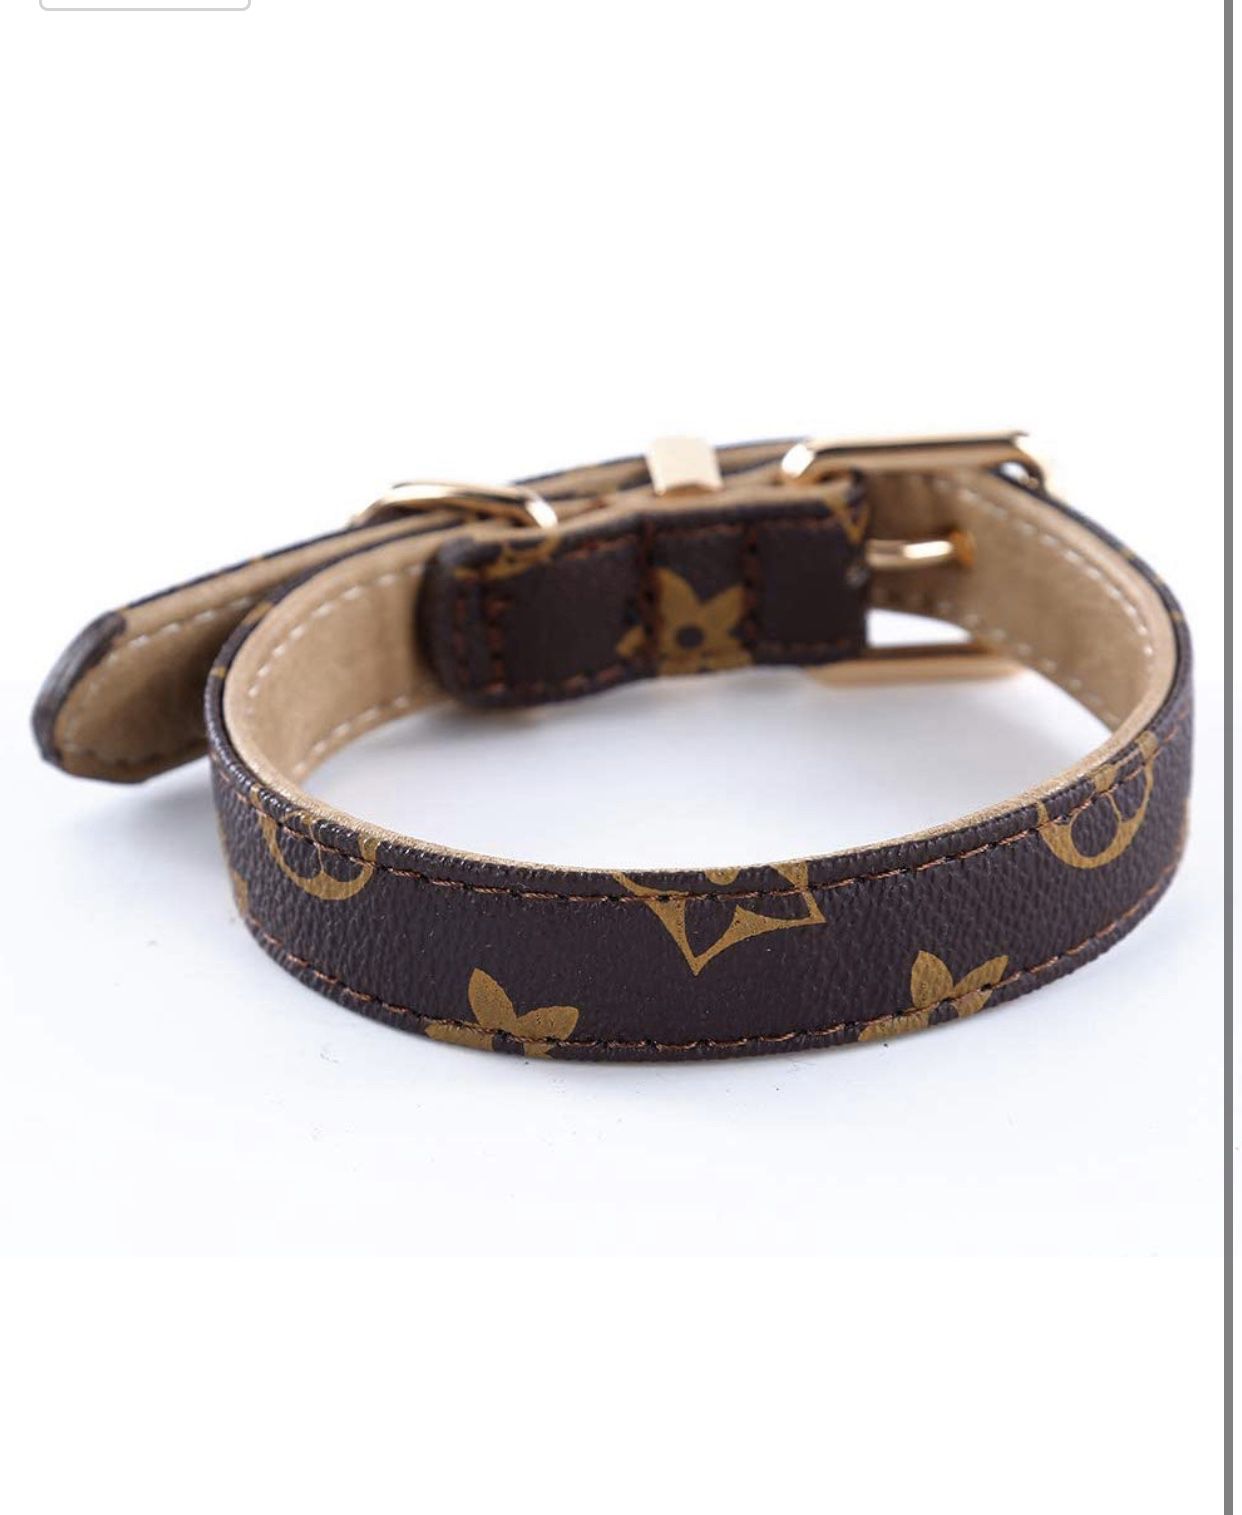 Designer Leather Dog Collar for Small Dogs BRAND NEW